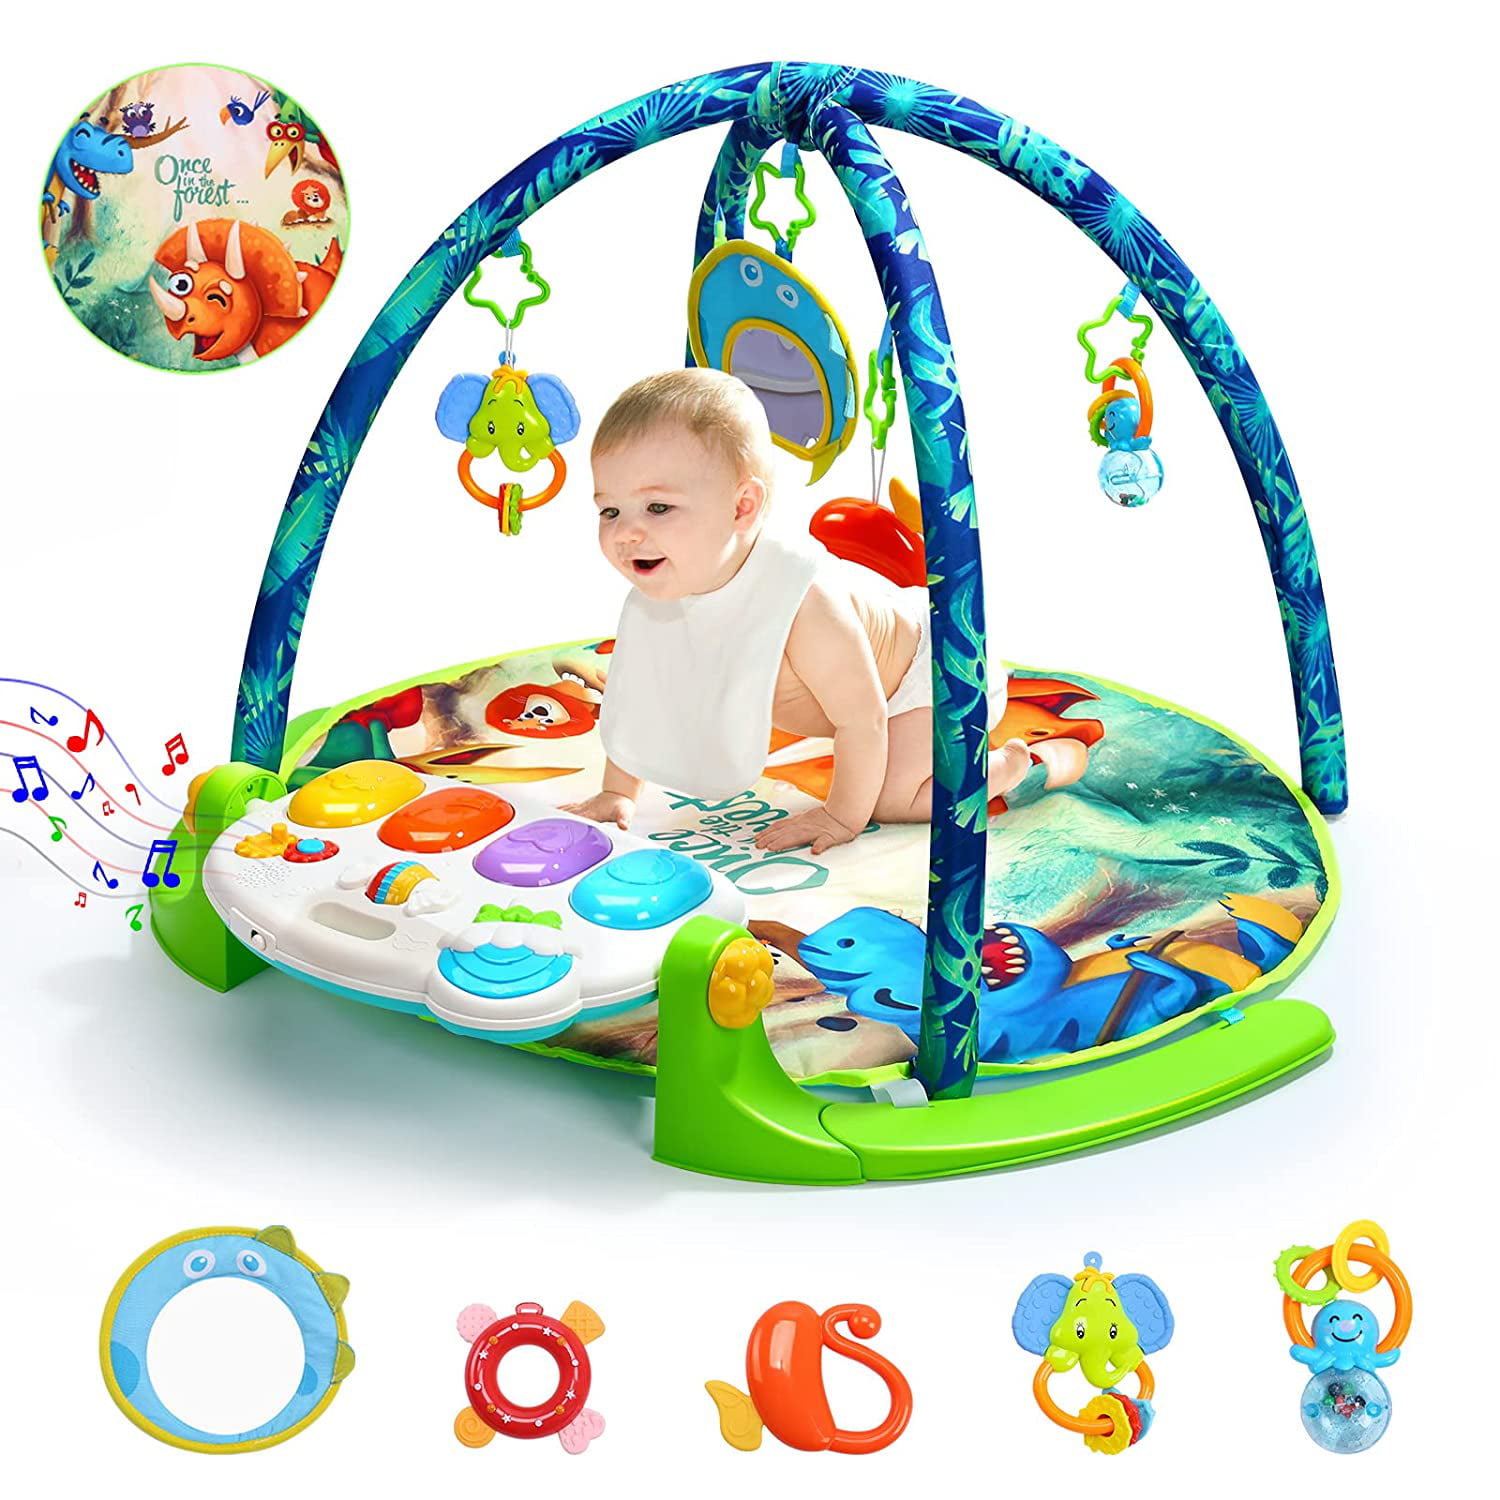 Activity Gym Playmat With Hanging Toys&Piano Light,Tummy Time Shower Gift Toys for Newborn Toddler Boys Girls in 0-3-6-12 Months,Detachable Padded Mat for Playing Baby Play Mat Musial Toys for Infant 